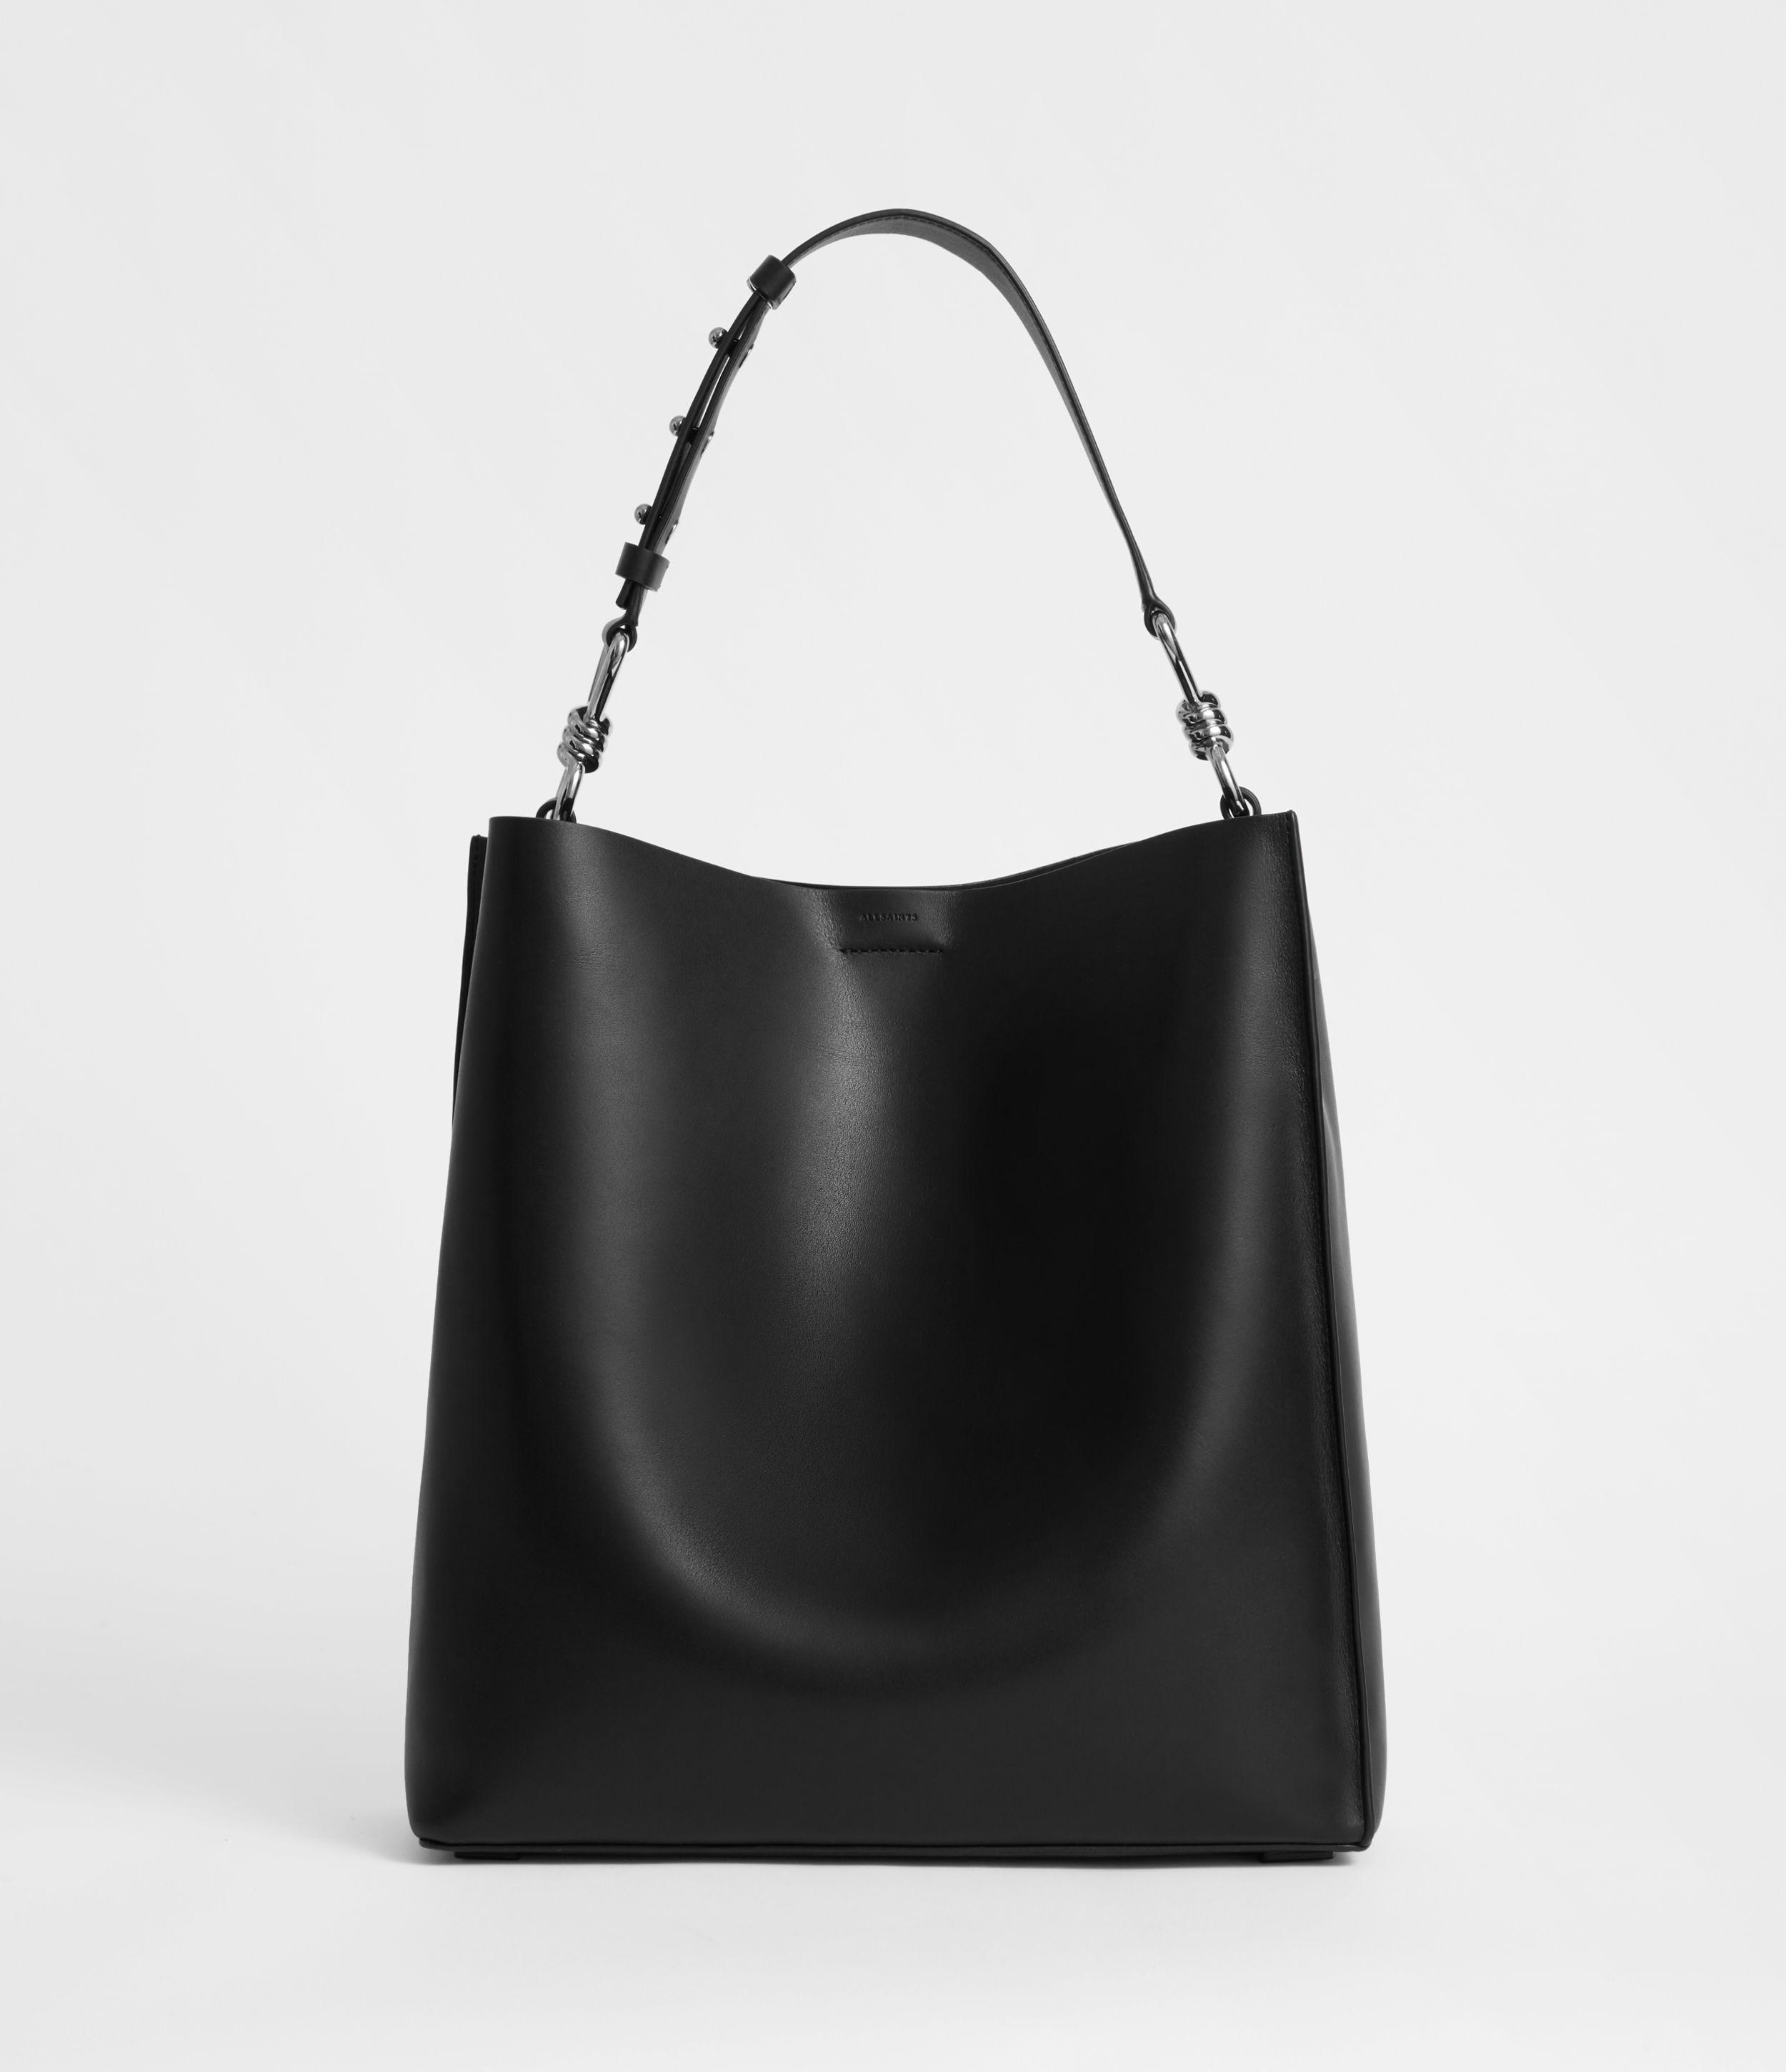 AllSaints Captain Leather North South Tote Bag in Black - Lyst